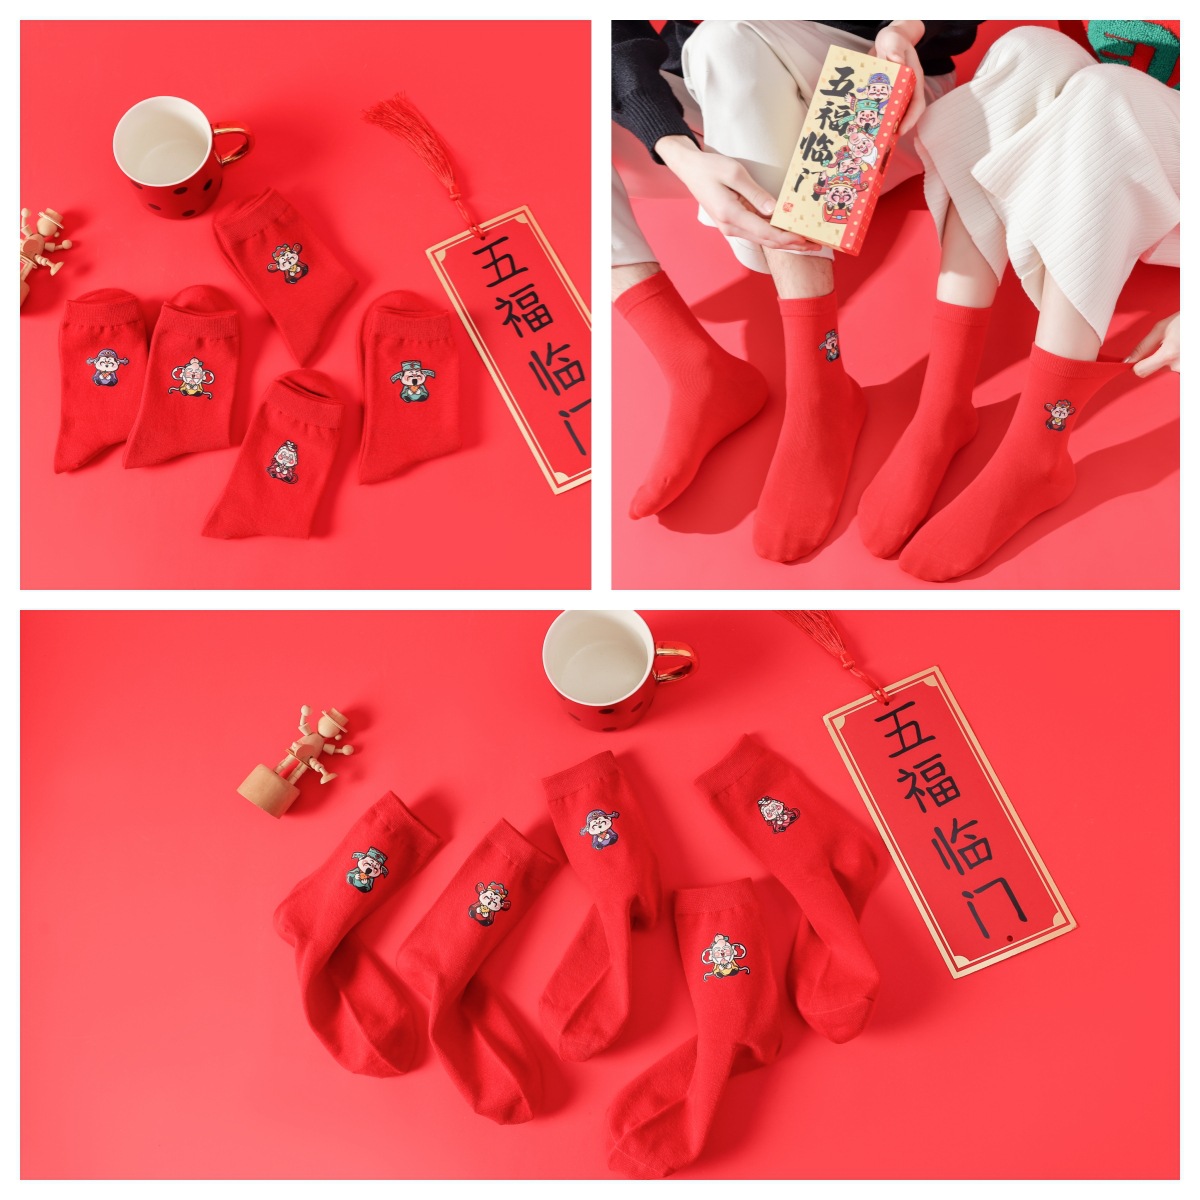 2023 Dragon Year Gift Box Red Socks Birth Year Men and Women Couple Middle Tube Cotton Socks New Year Gift Red Gift Socks